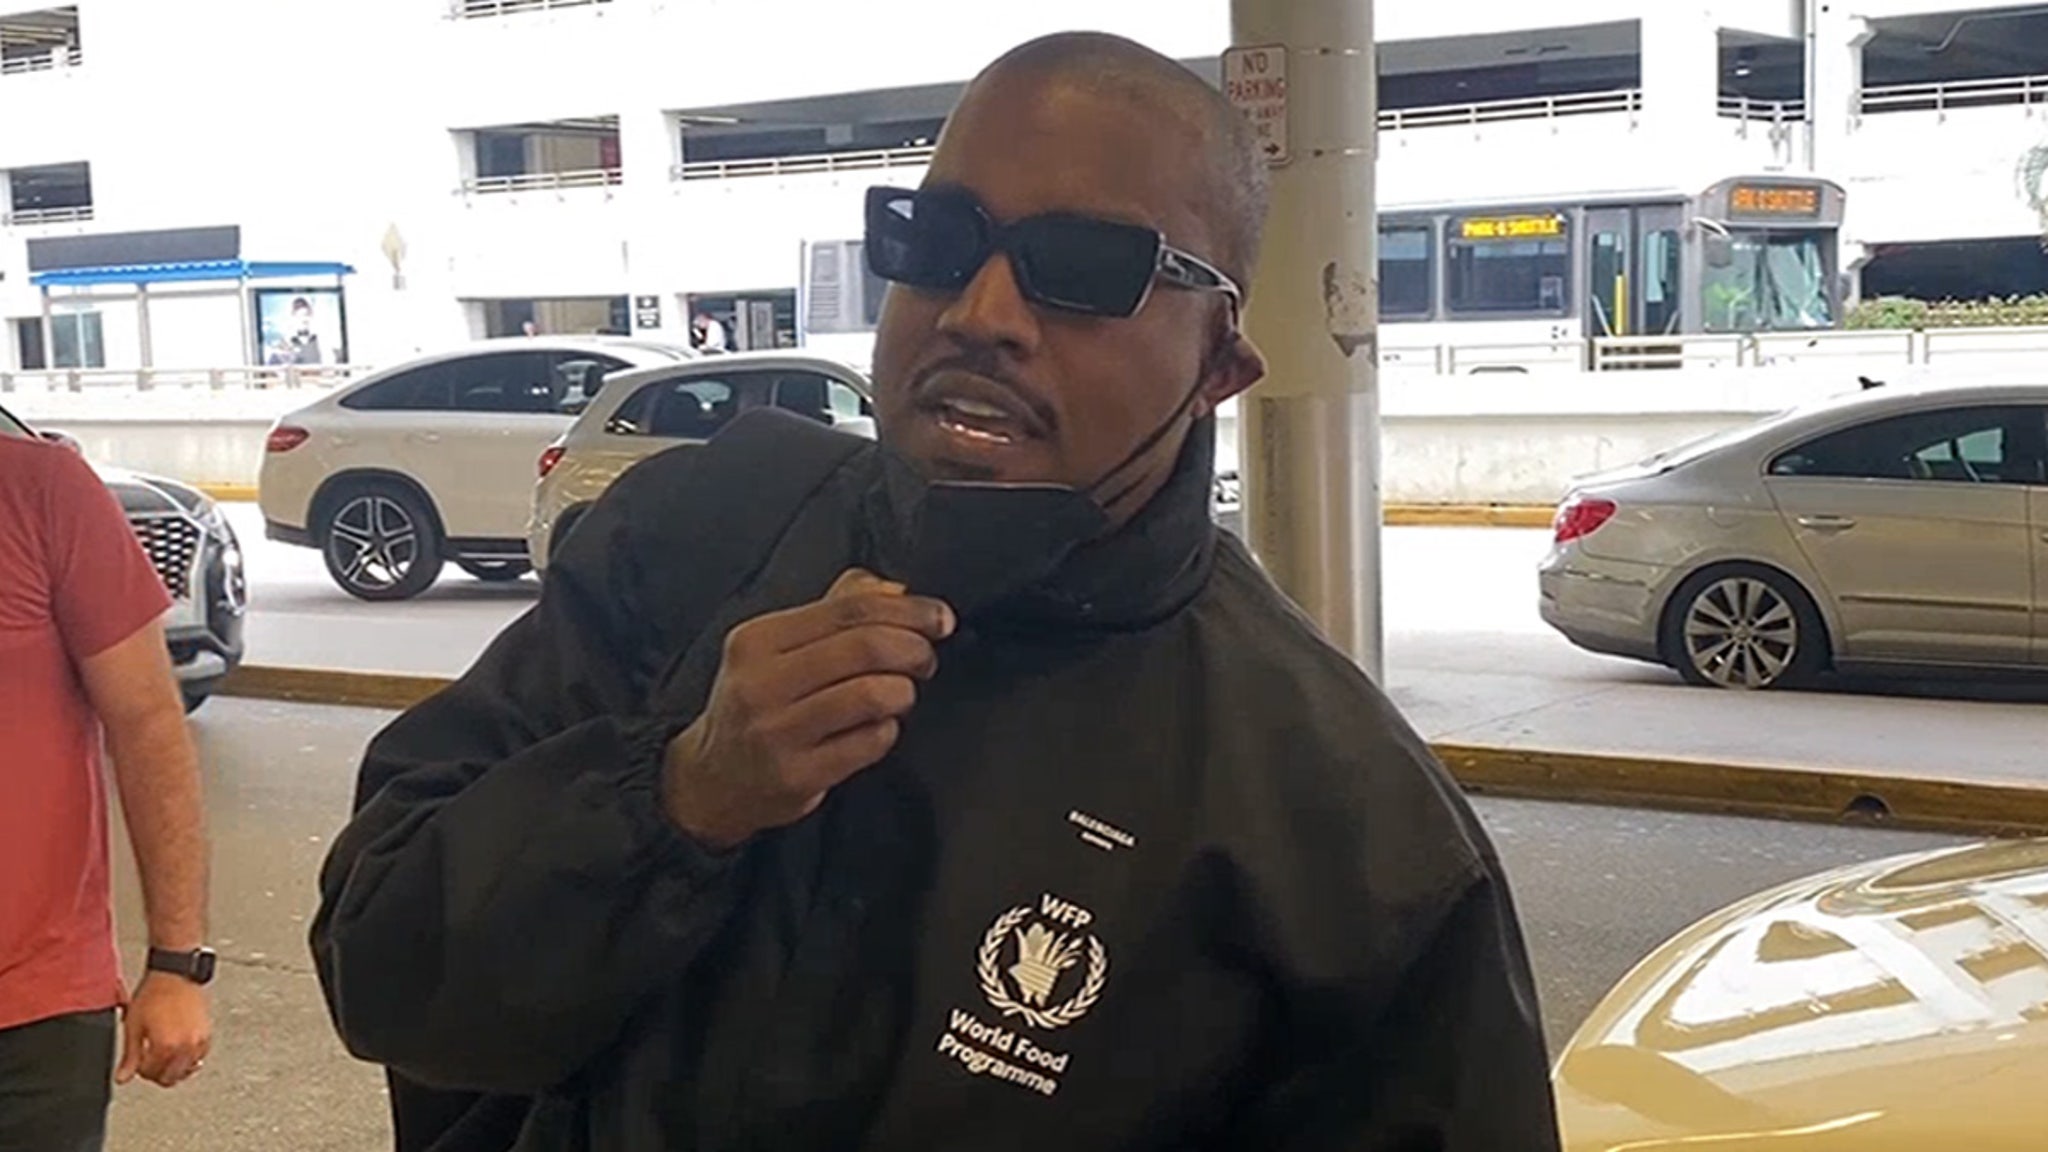 Kanye West Lectures Paparazzi about Milking His Image, Leaves Miami thumbnail